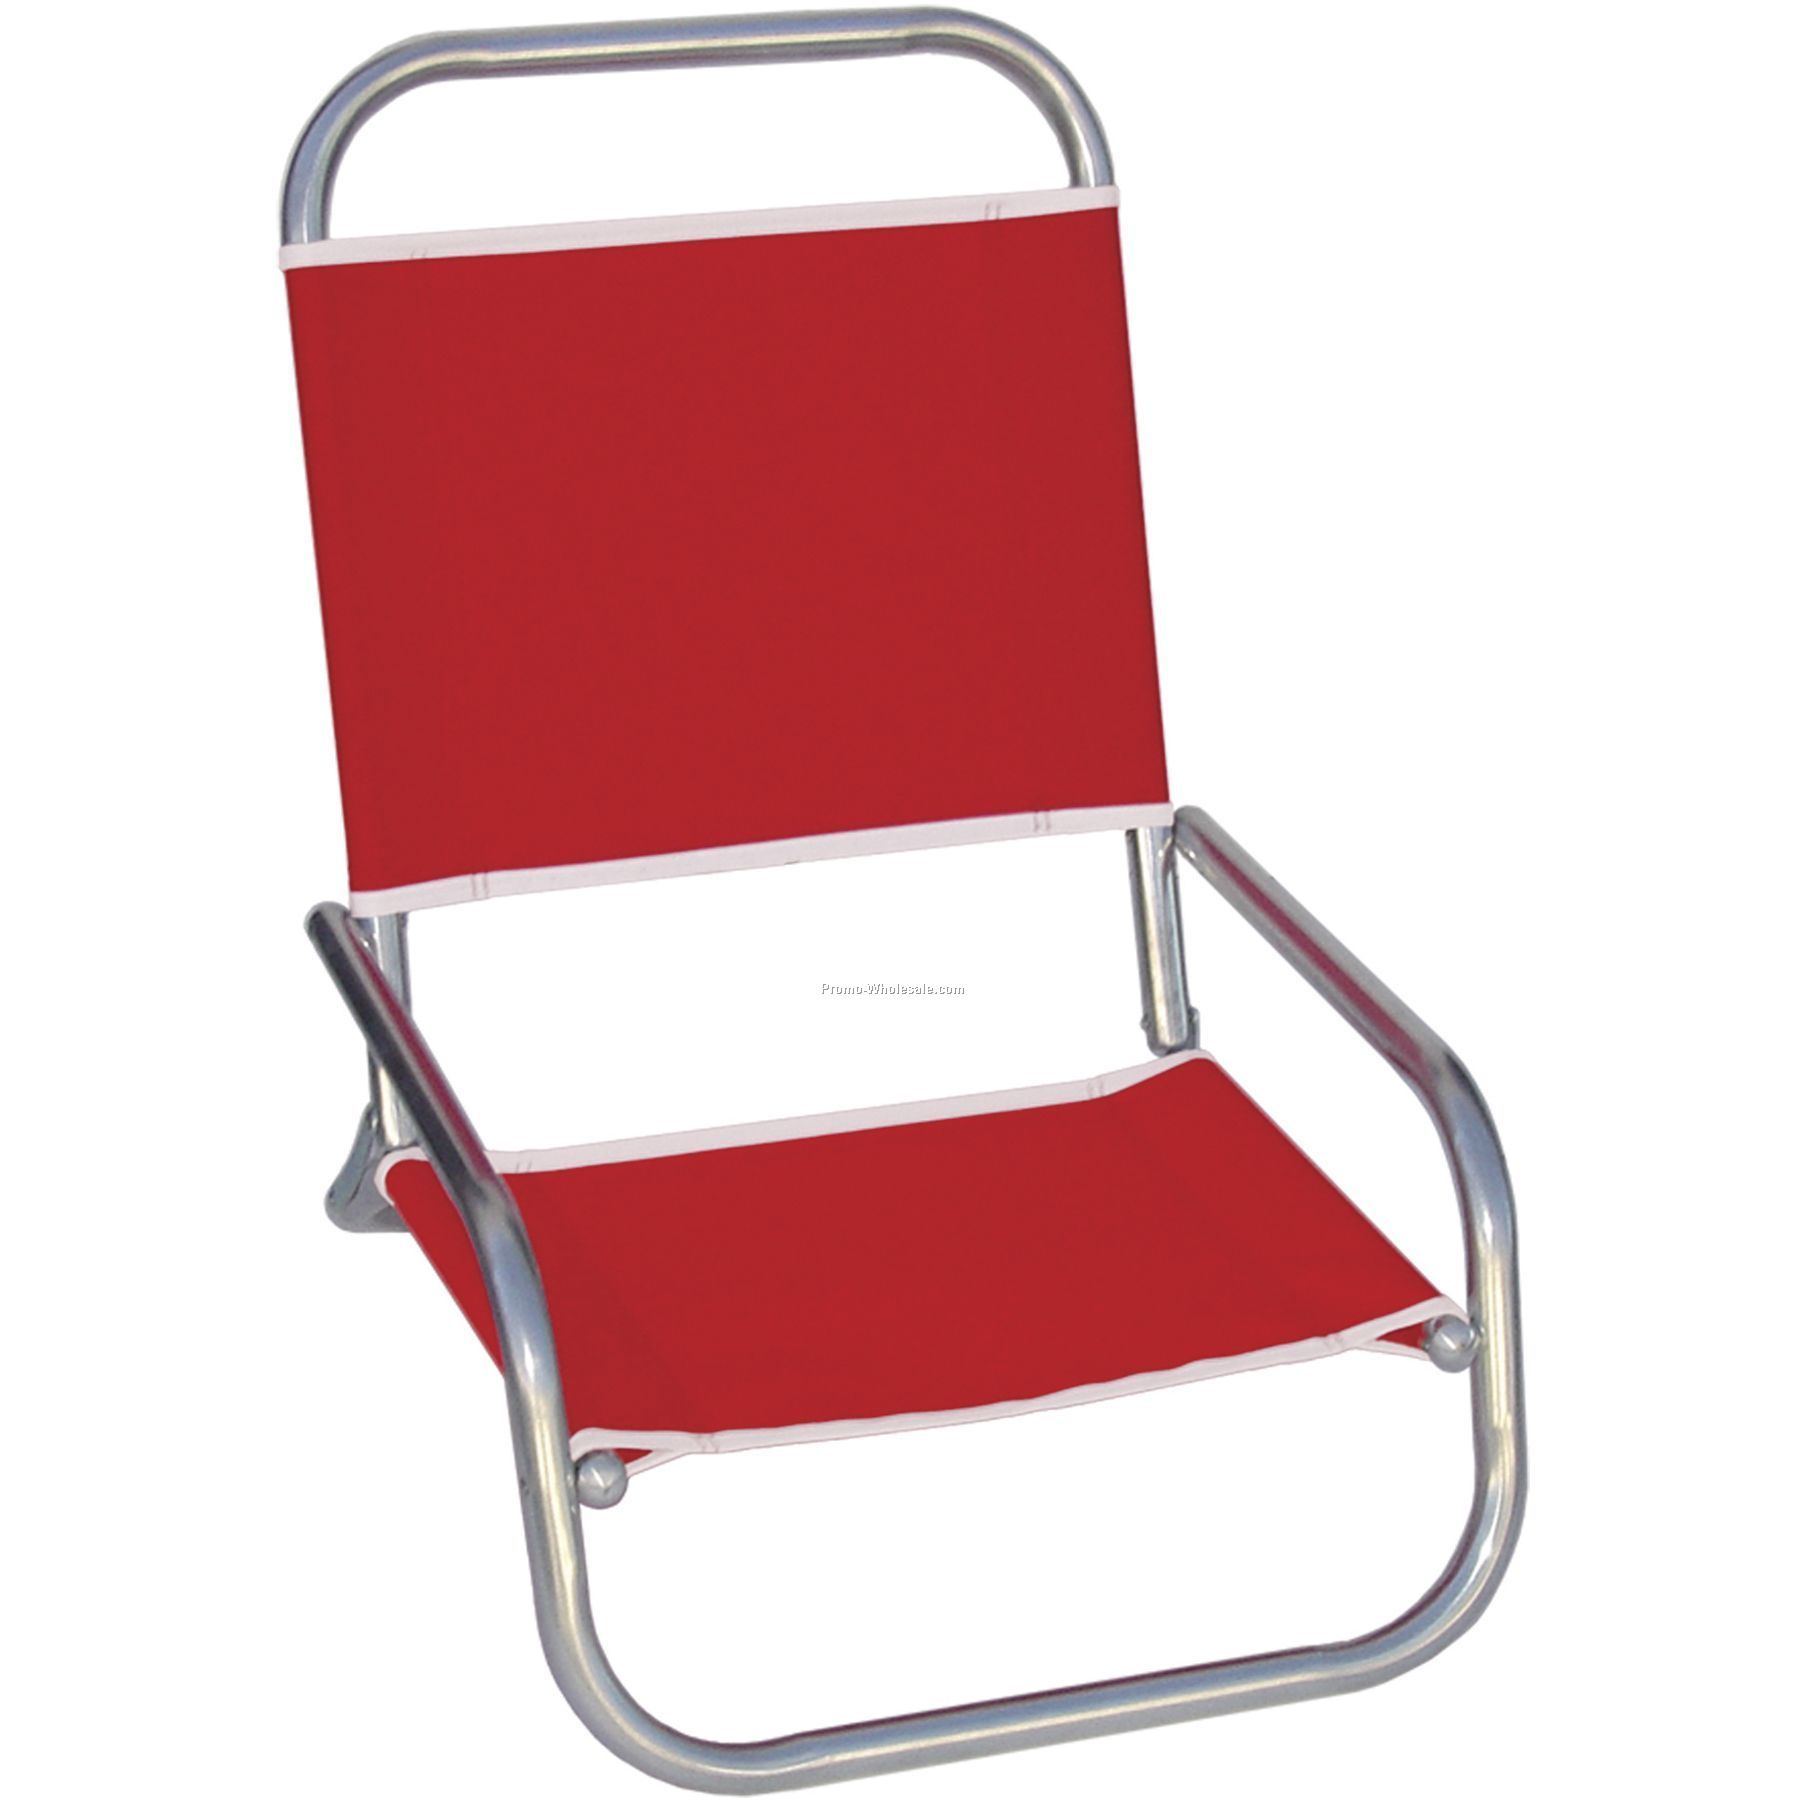 Deluxe Beach Chair - Made In Usa